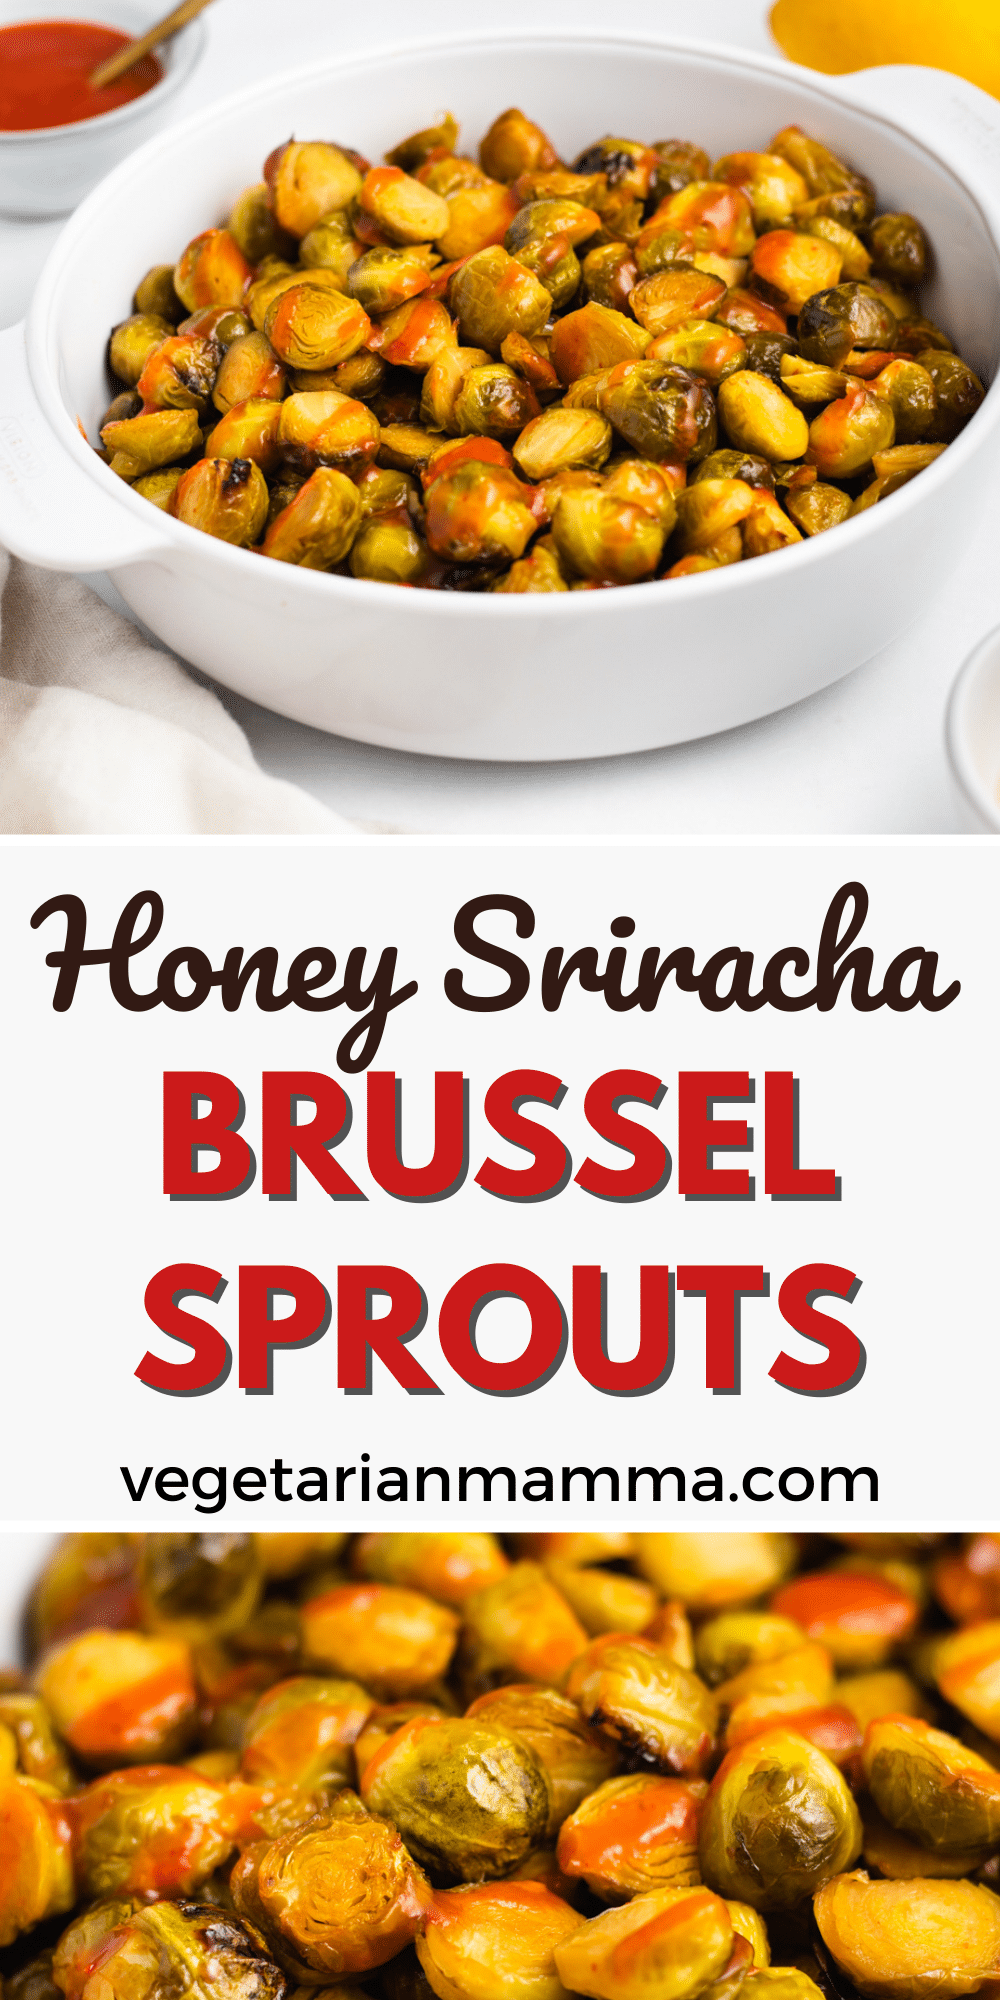 Honey Sriracha Brussel Sprouts are a sweet and spicy veggie side dish. Easily jazz up roasted sprouts with a simple and flavorful sauce!